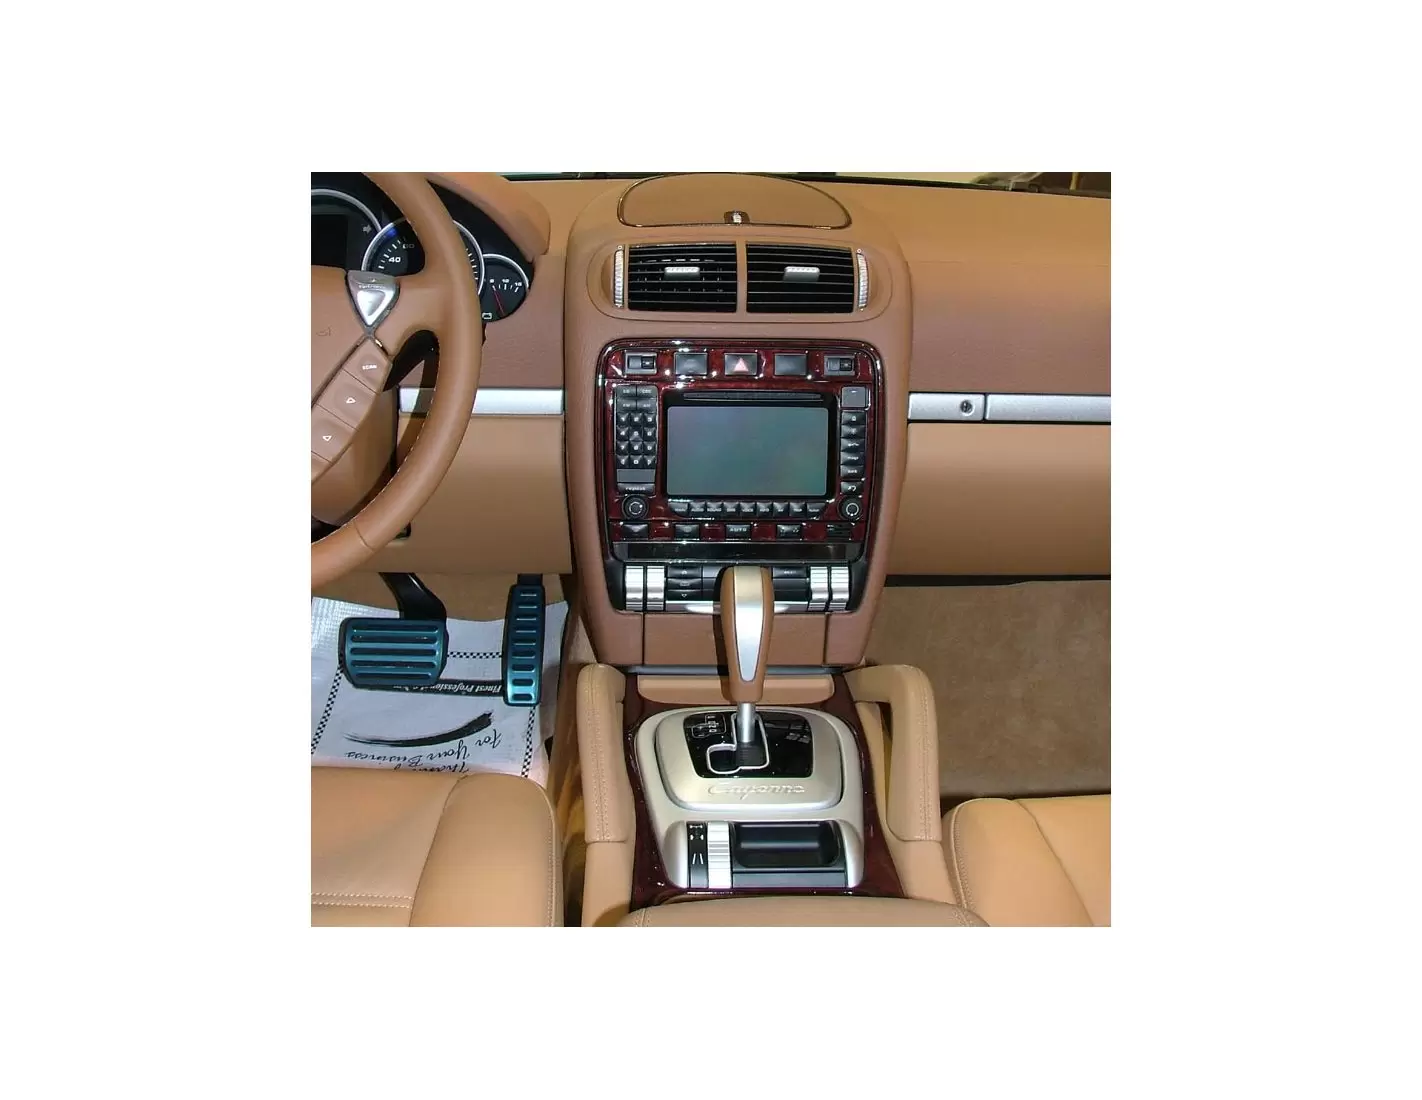 Porsche Cayenee 2003-UP With or Without NAVI BD Interieur Dashboard Bekleding Volhouder